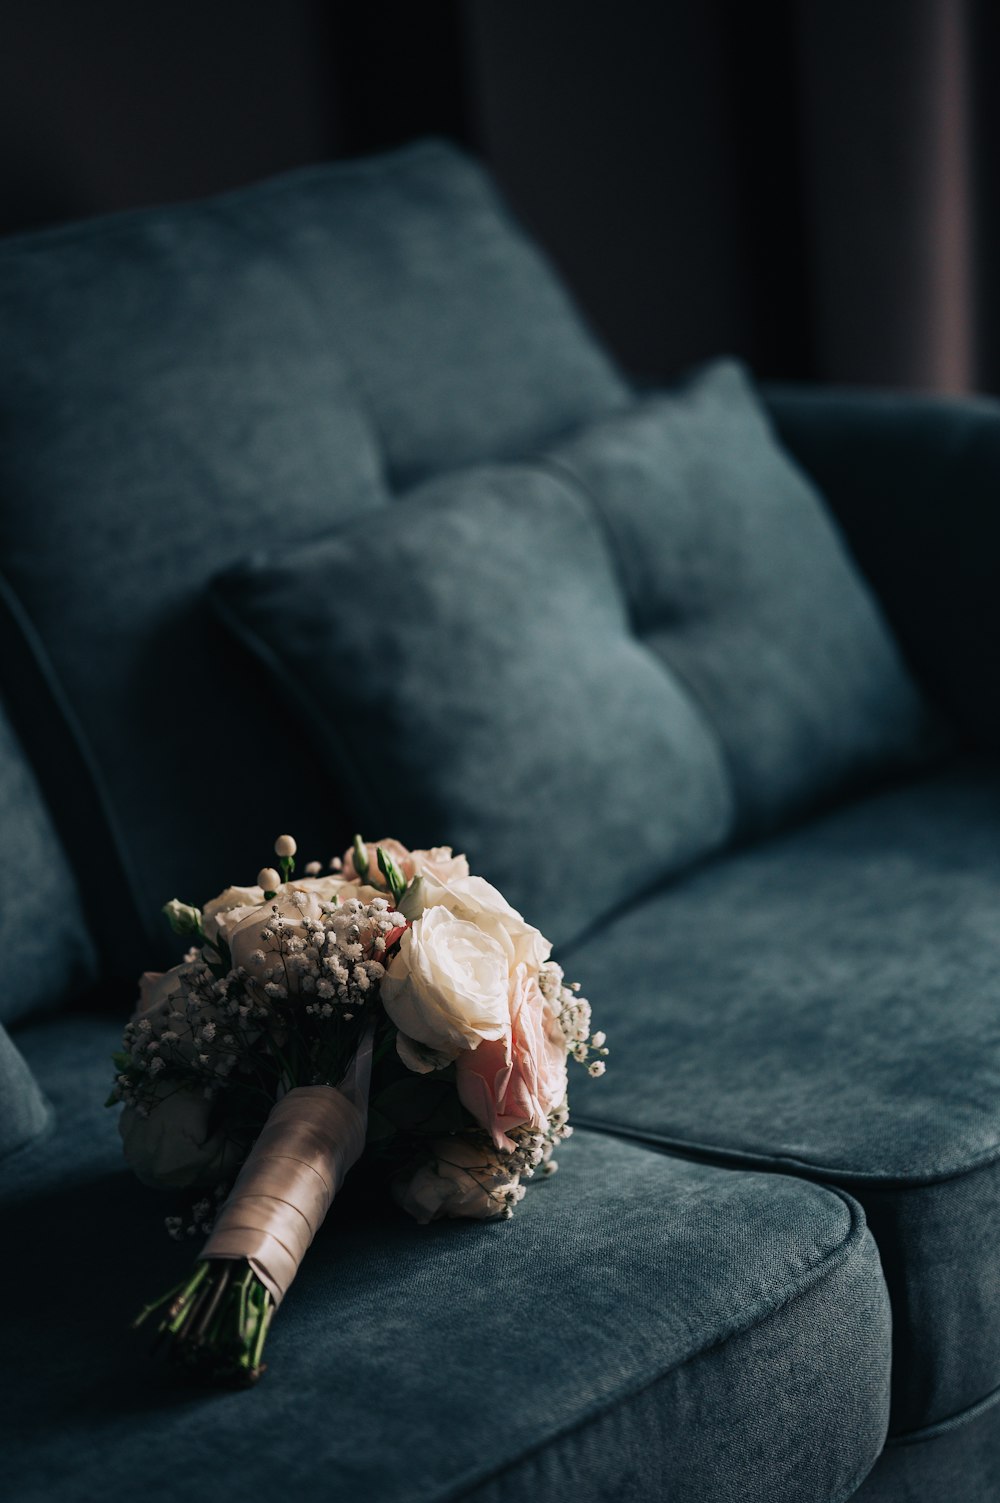 a bouquet of flowers sitting on a couch